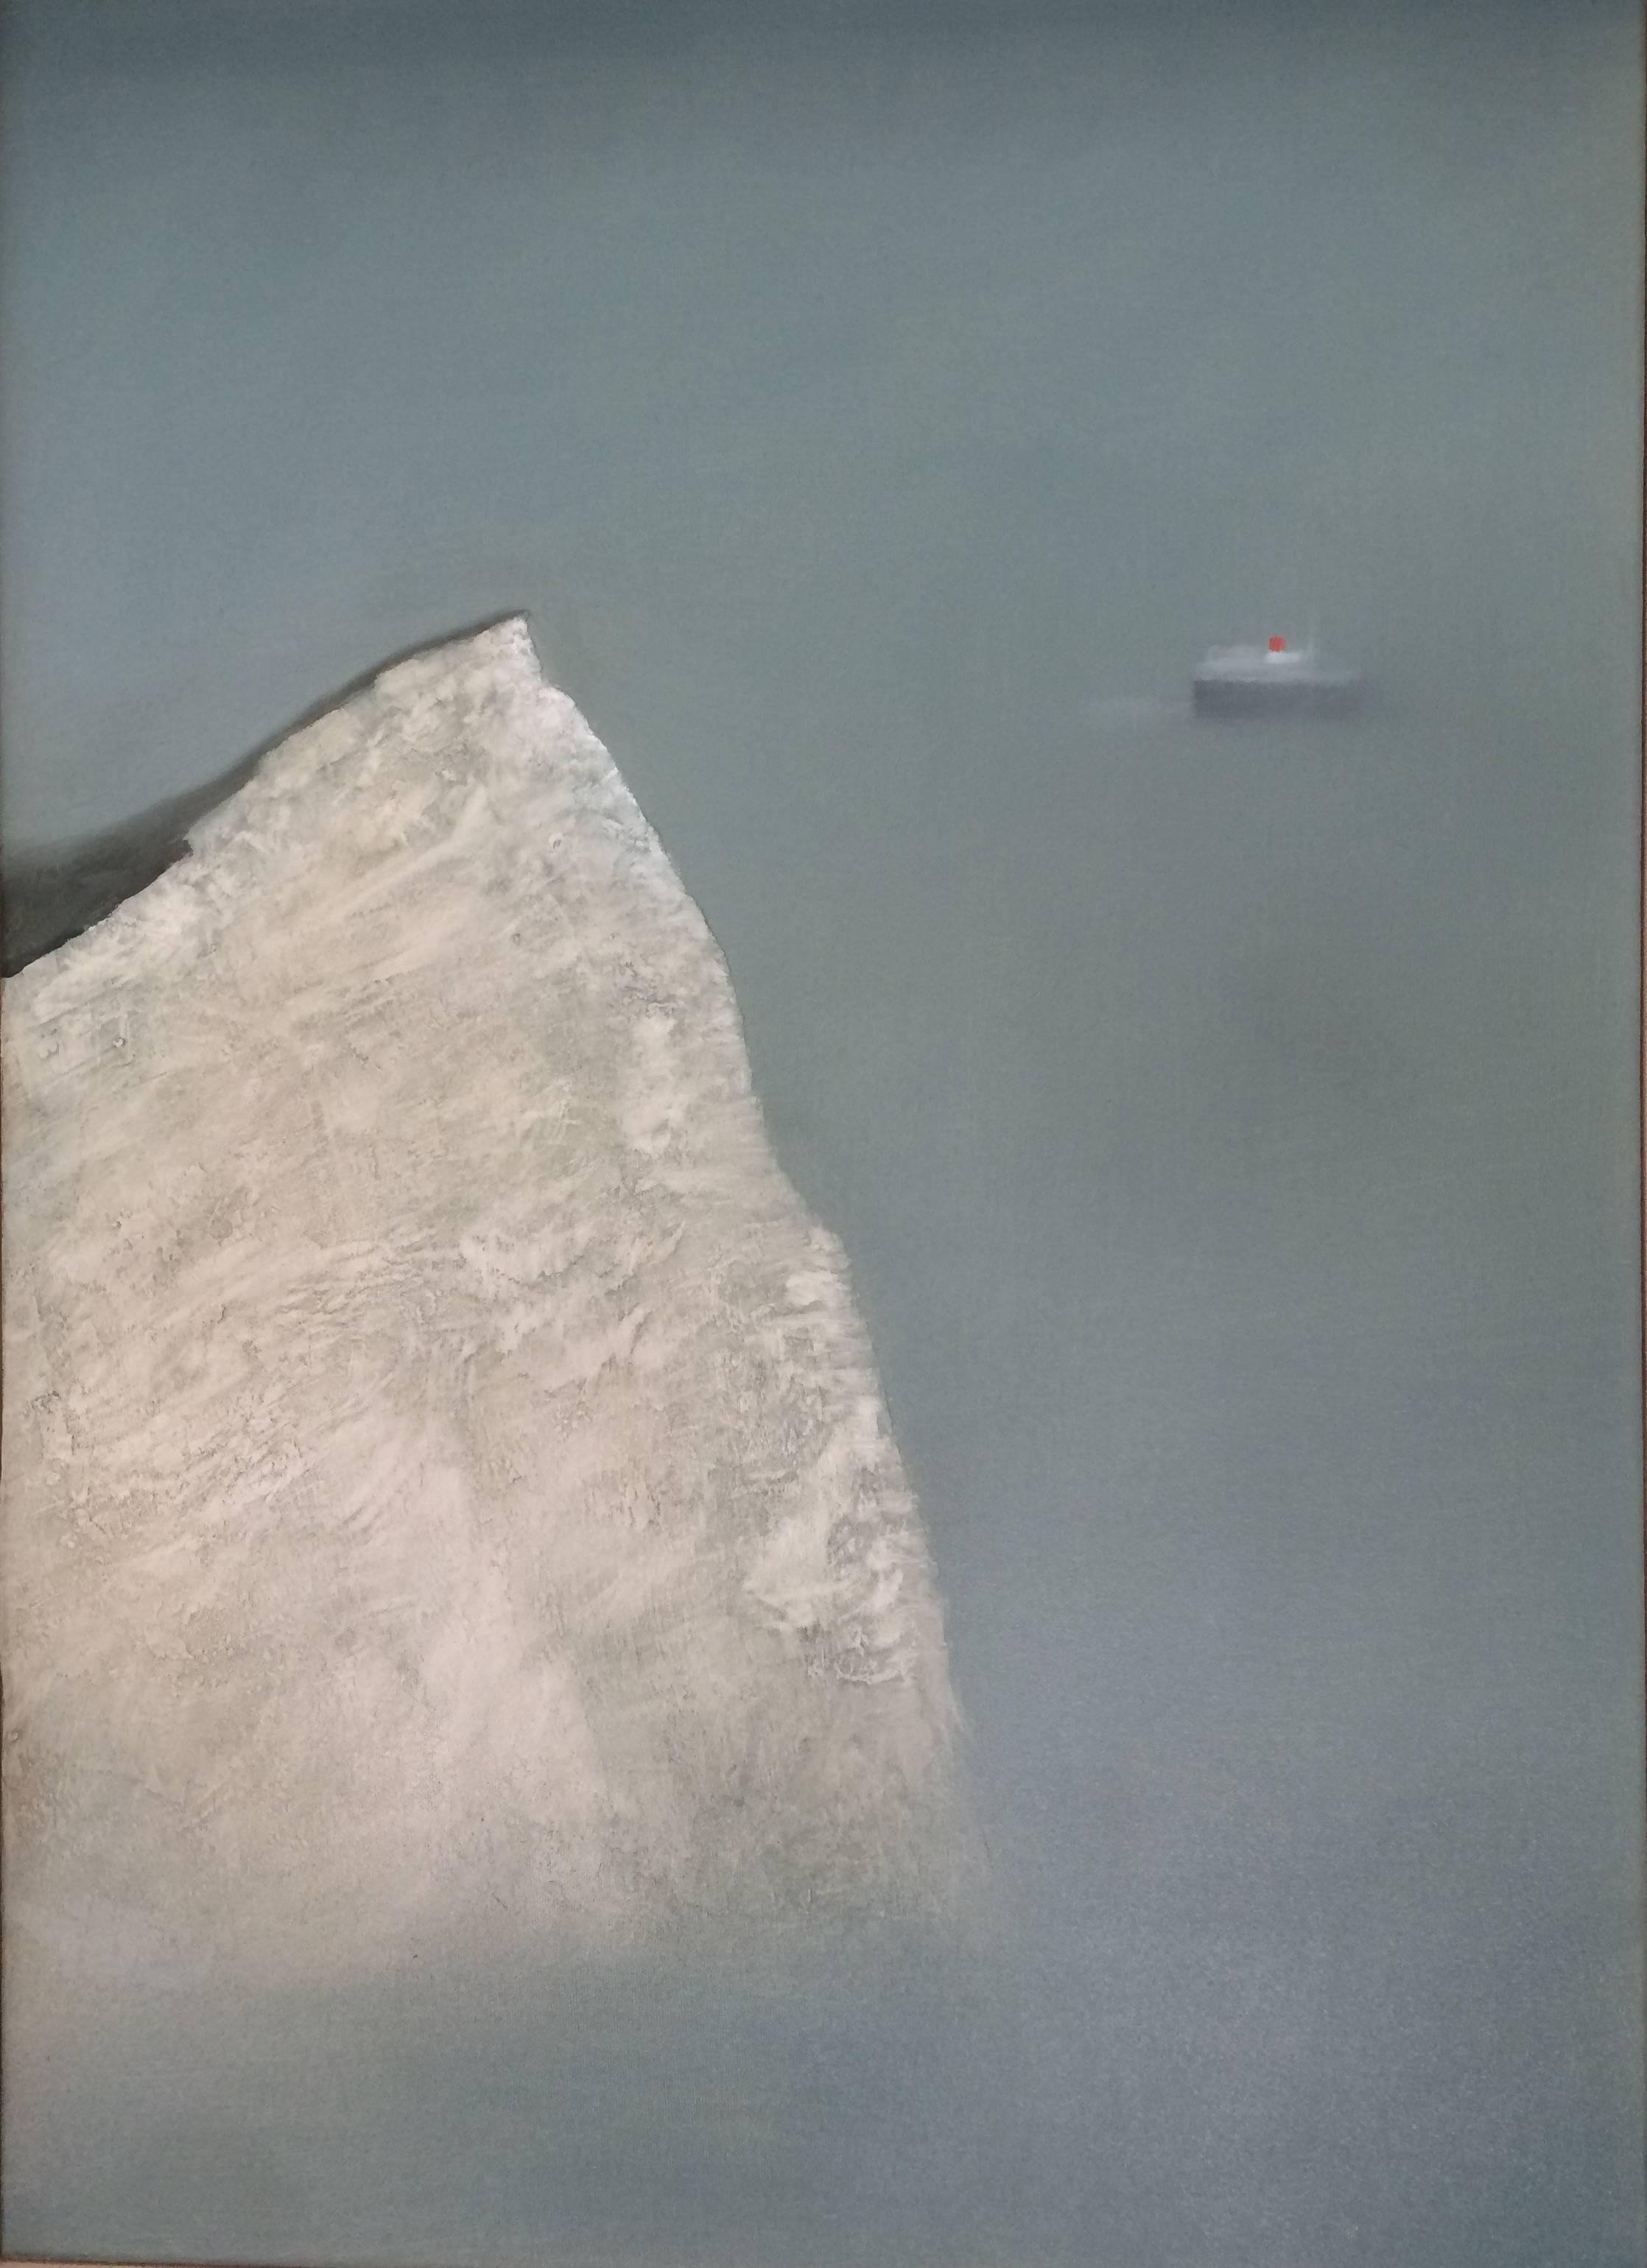 Charlie Baird
Cliff
Oil on canvas
Size : H 69 cm x W 49 cm
Framed in a limed wood frame measuring 1.5 cm wide, and 4.5 cm depth.
Please note that in situ images are purely an indication of how a piece may look.

A misty seascape of the south coast